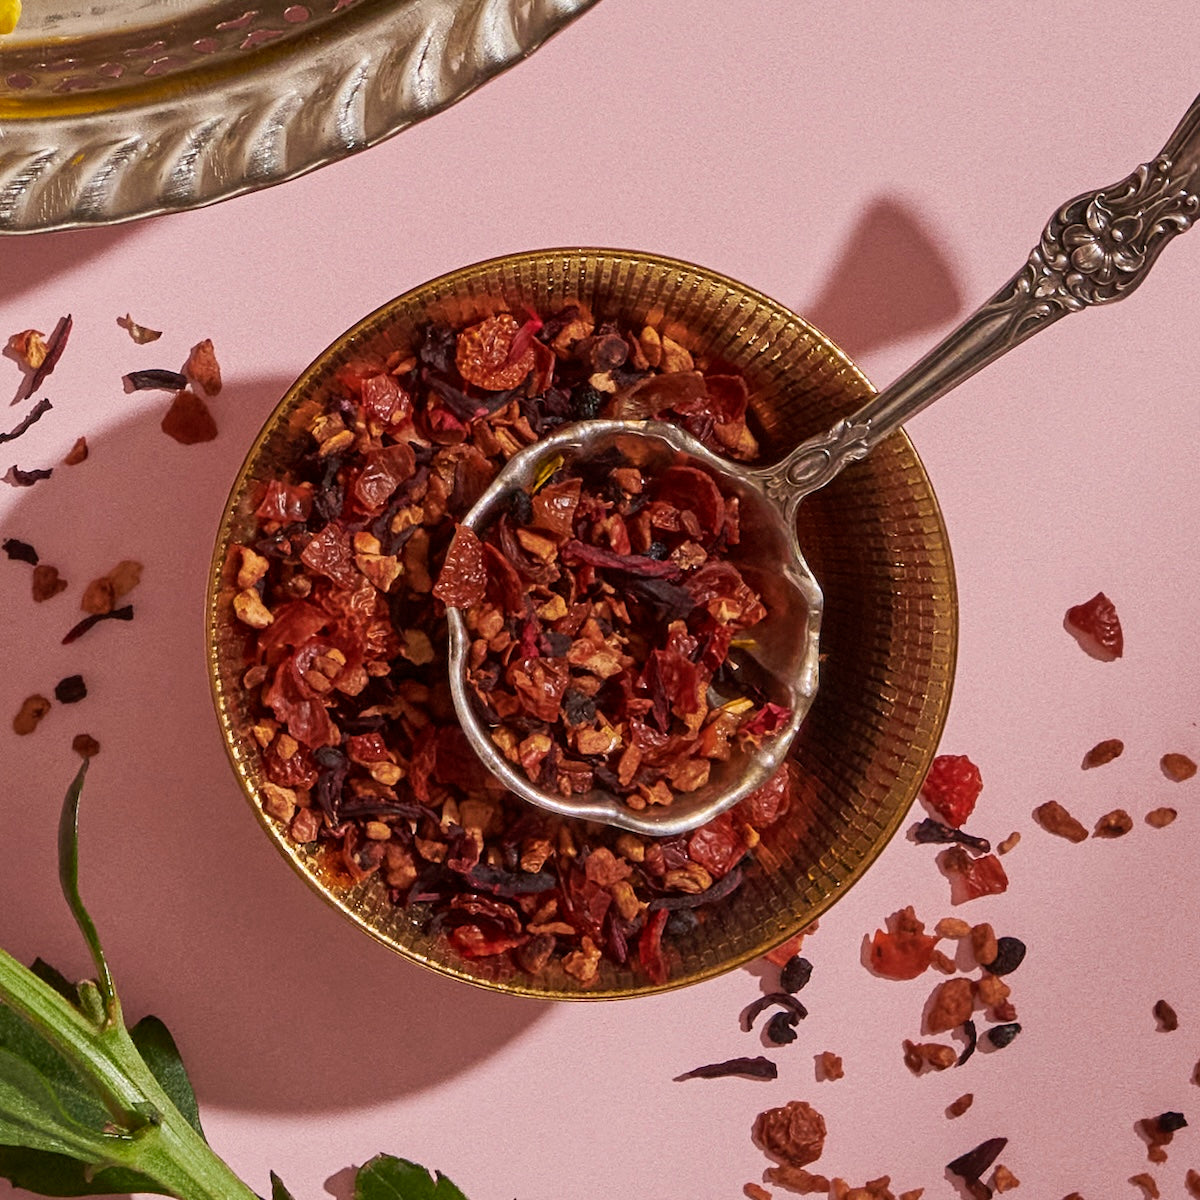 A close-up photo of a brass bowl filled with Hibiscus Elderberry: Cosmic Garden Iced Tea by Magic Hour, featuring a variety of red and brown pieces, with an ornate metal spoon resting inside. The organic tea is placed on a pink surface, and some of the loose leaf tea blend is scattered around. A green leaf is also partially visible.